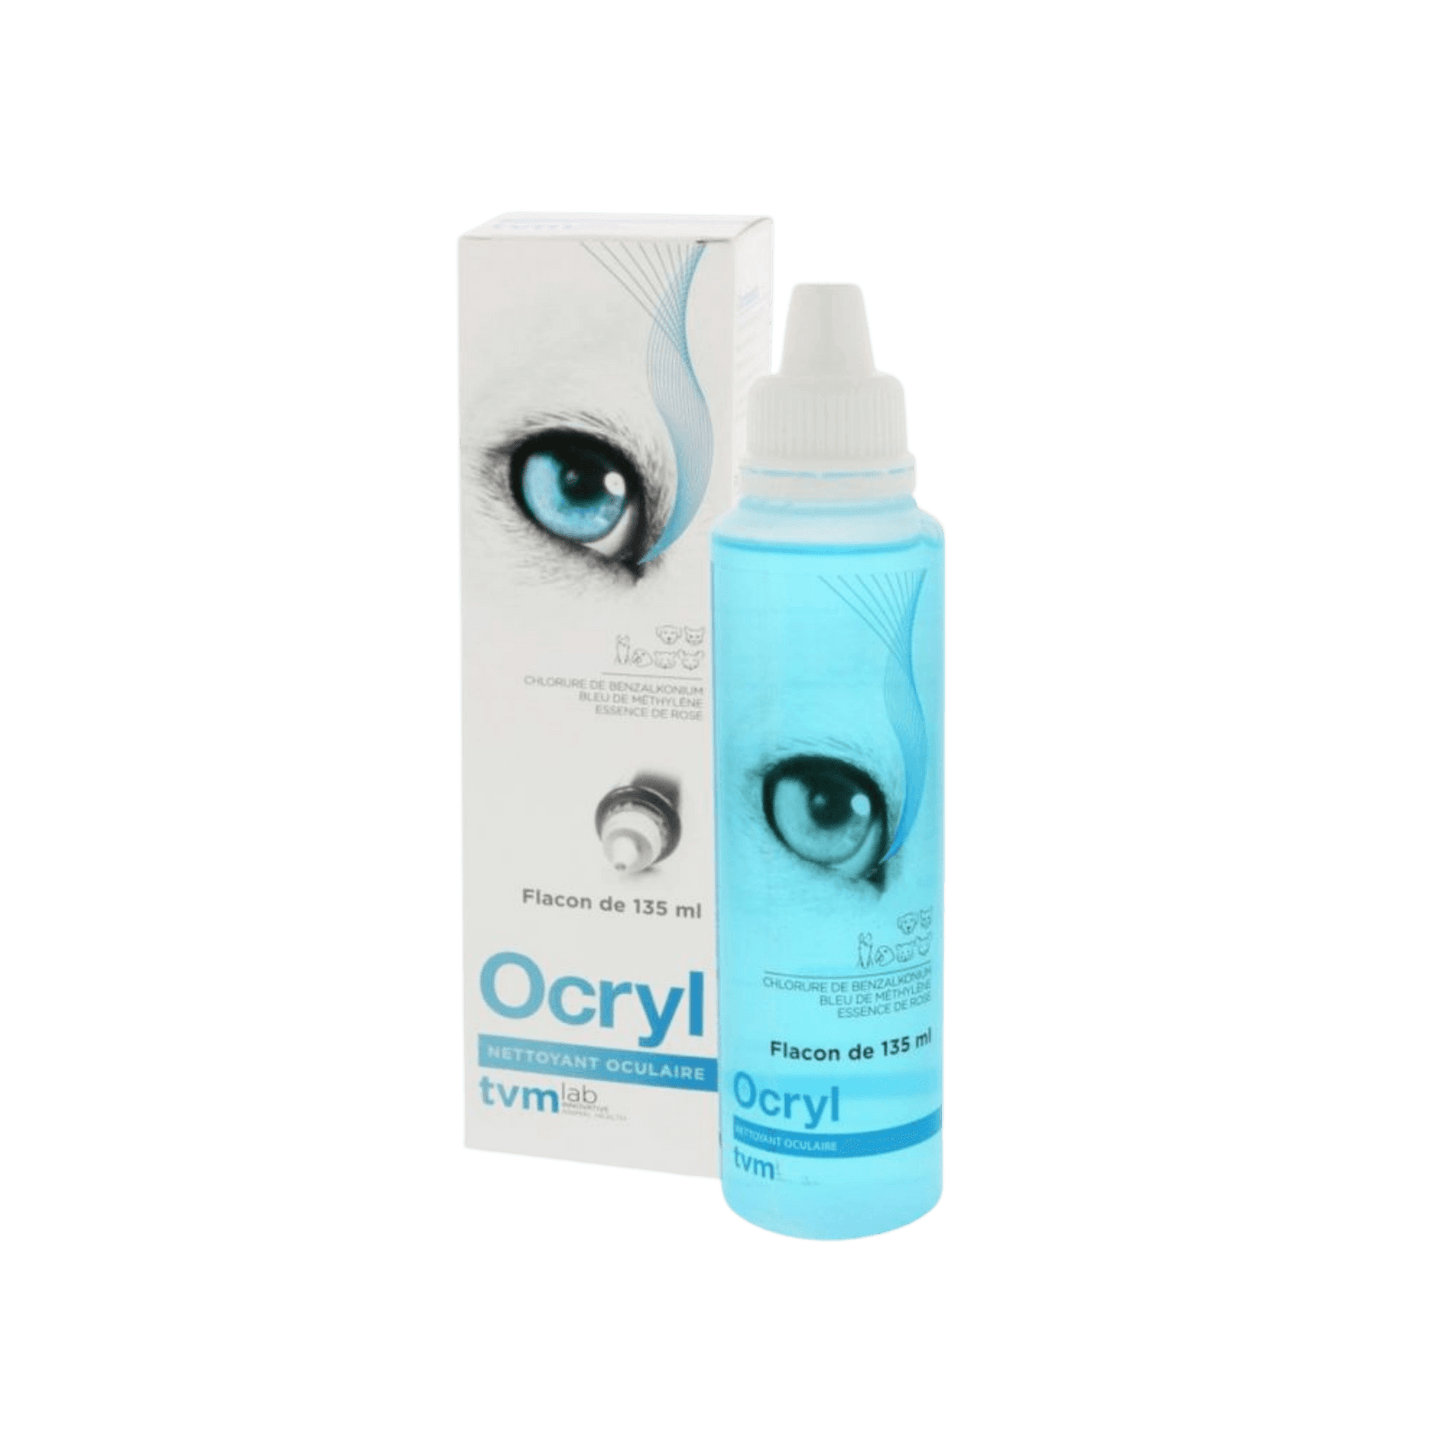 TVM Ocryl Nettoyant oculaire - Catopia 